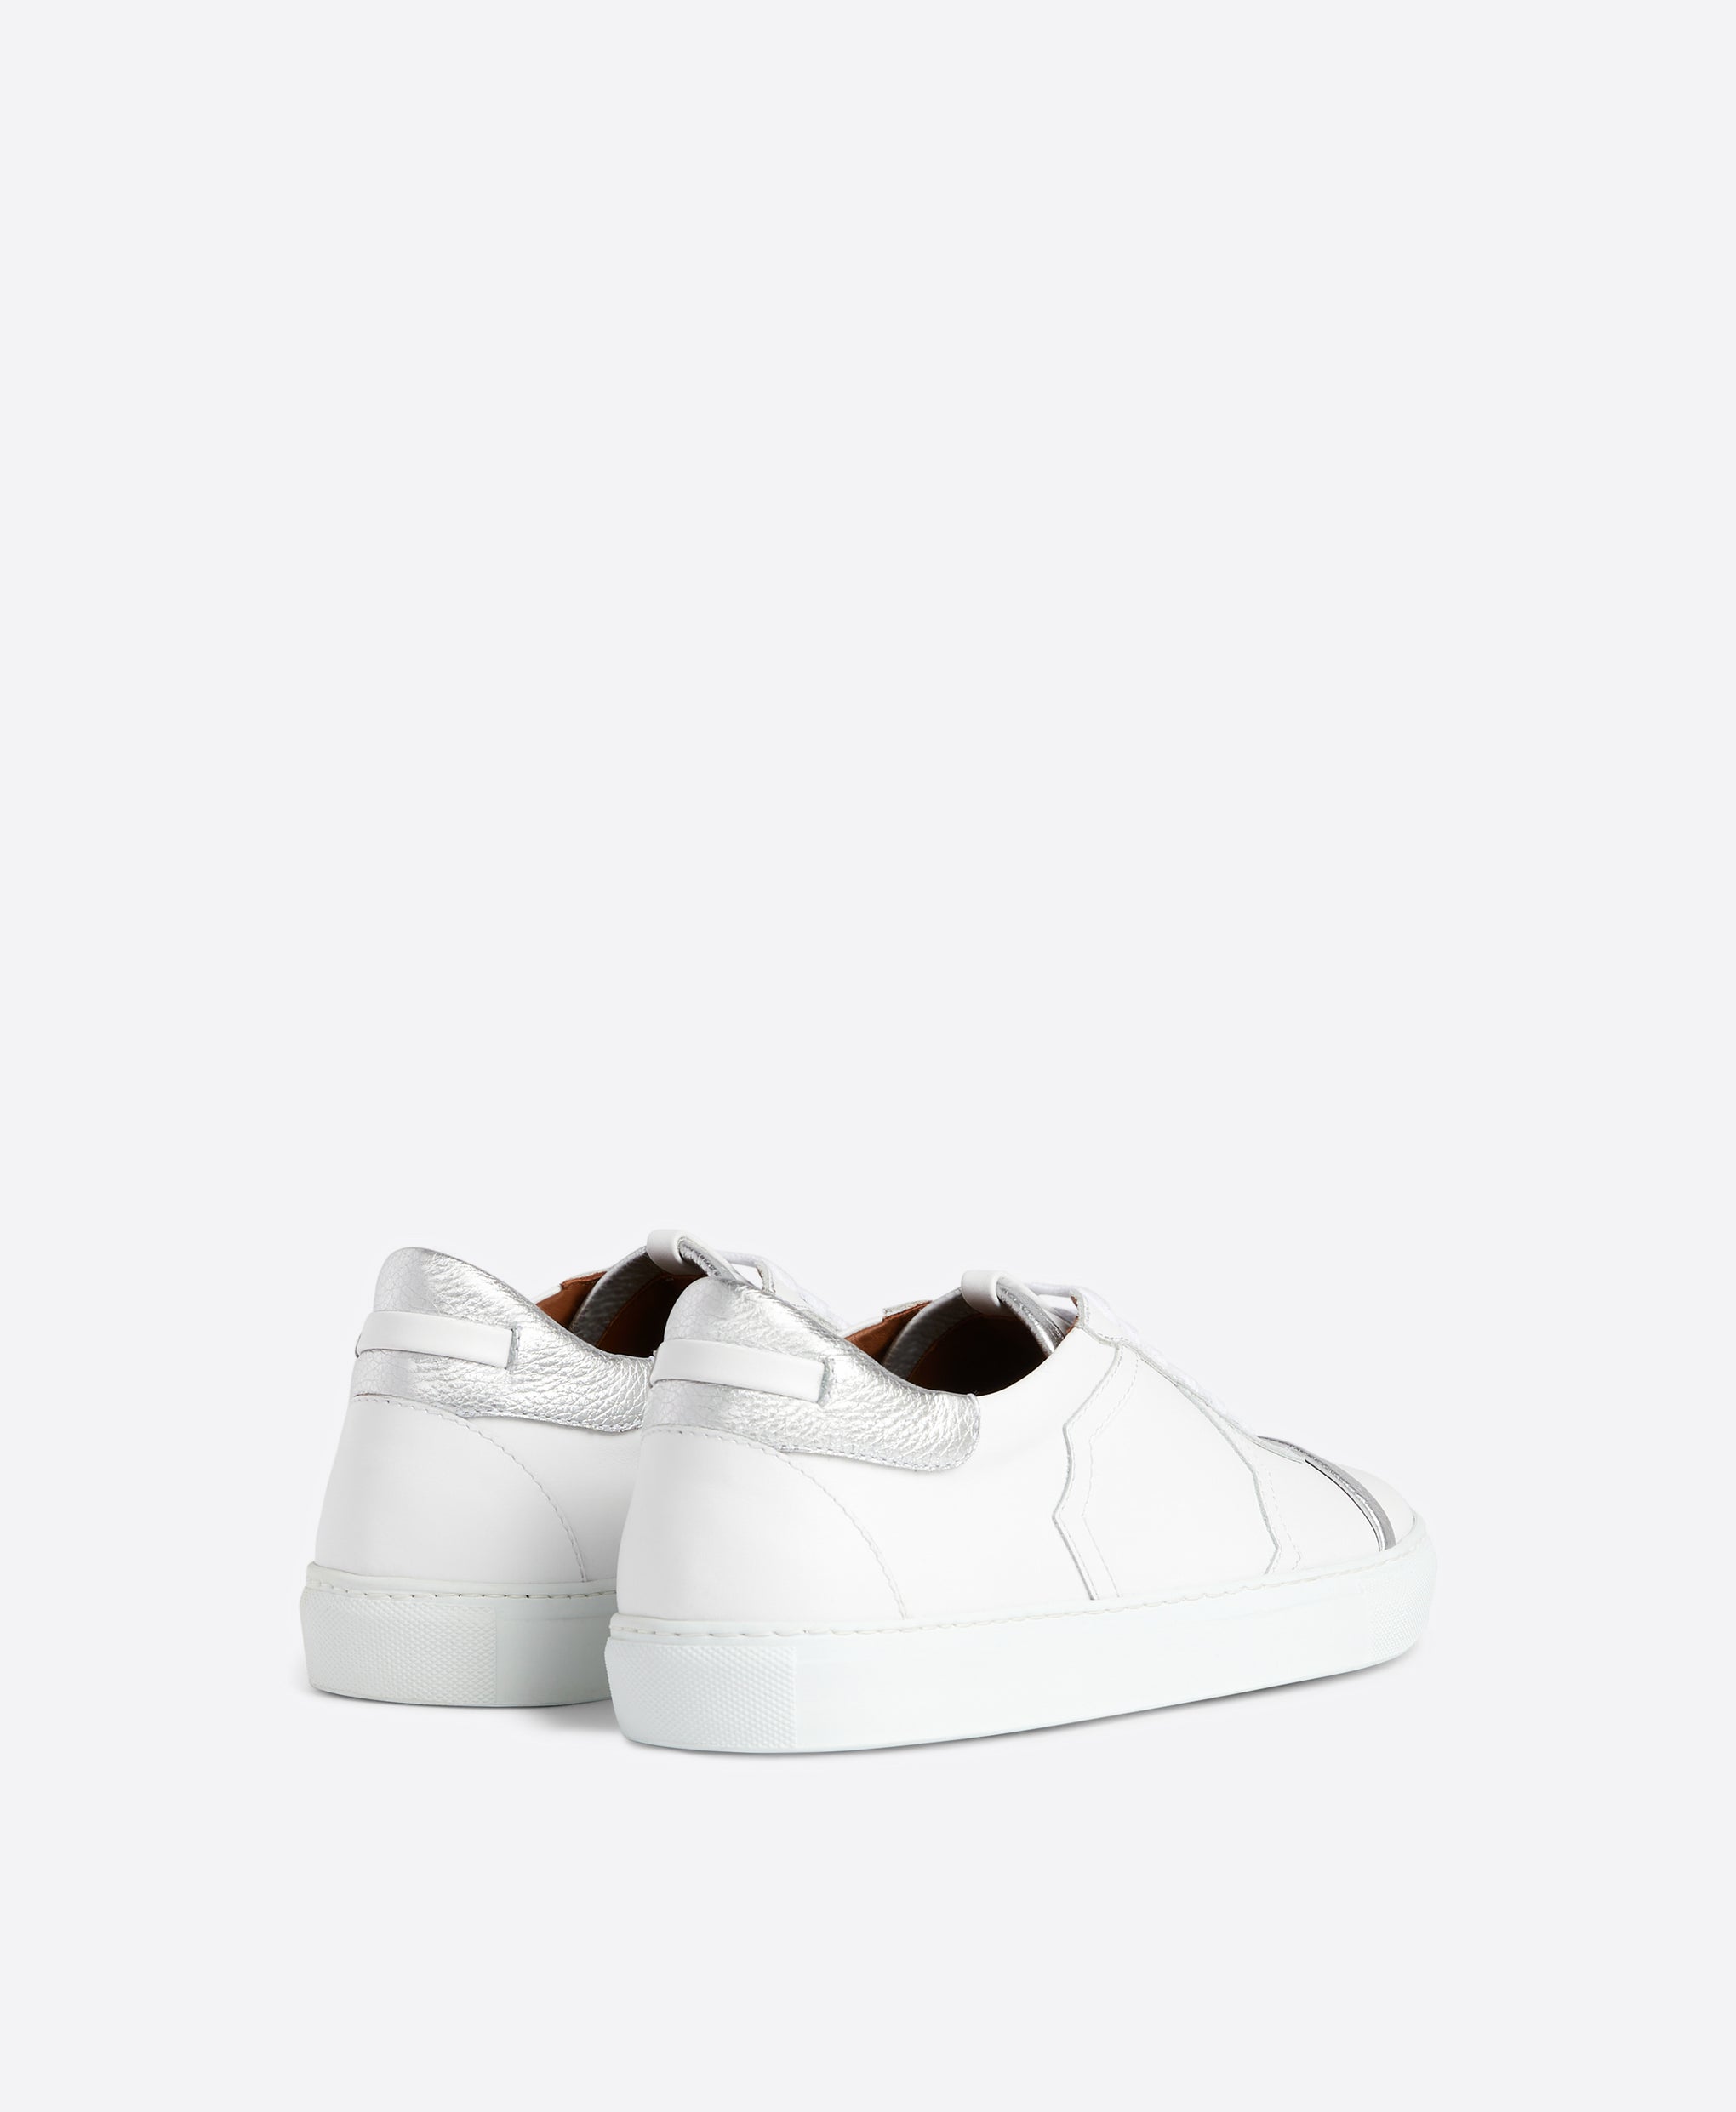 Men's Musa White and Silver Leather Sneakers Malone Souliers